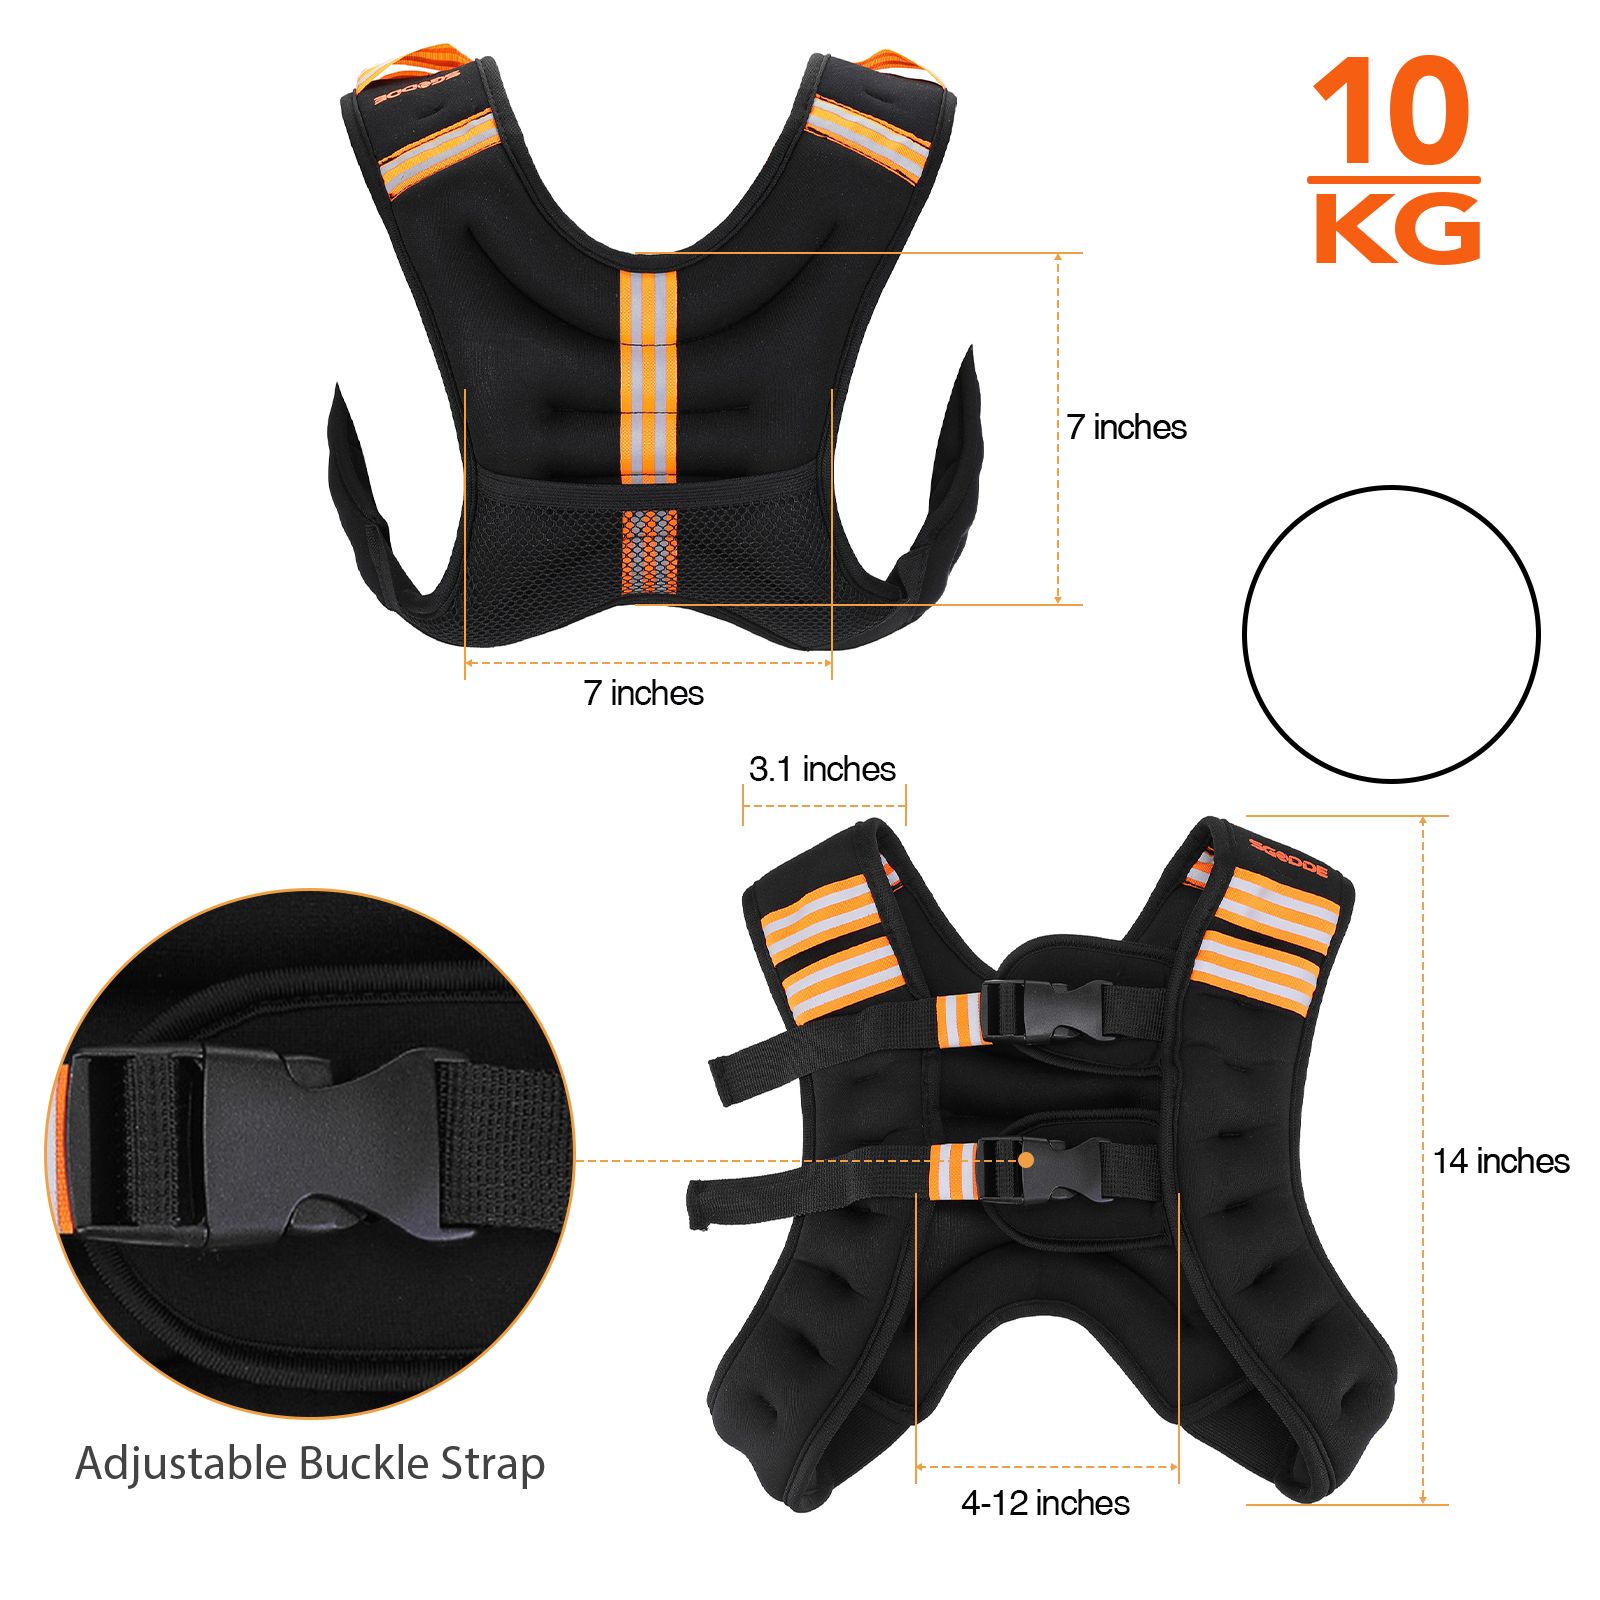 SGODDE-Weighted-Vest-with-Reflective-Strips-Adjustable-Weight-Vest-for-Men-and-Women-Strength-Traini-1878427-6